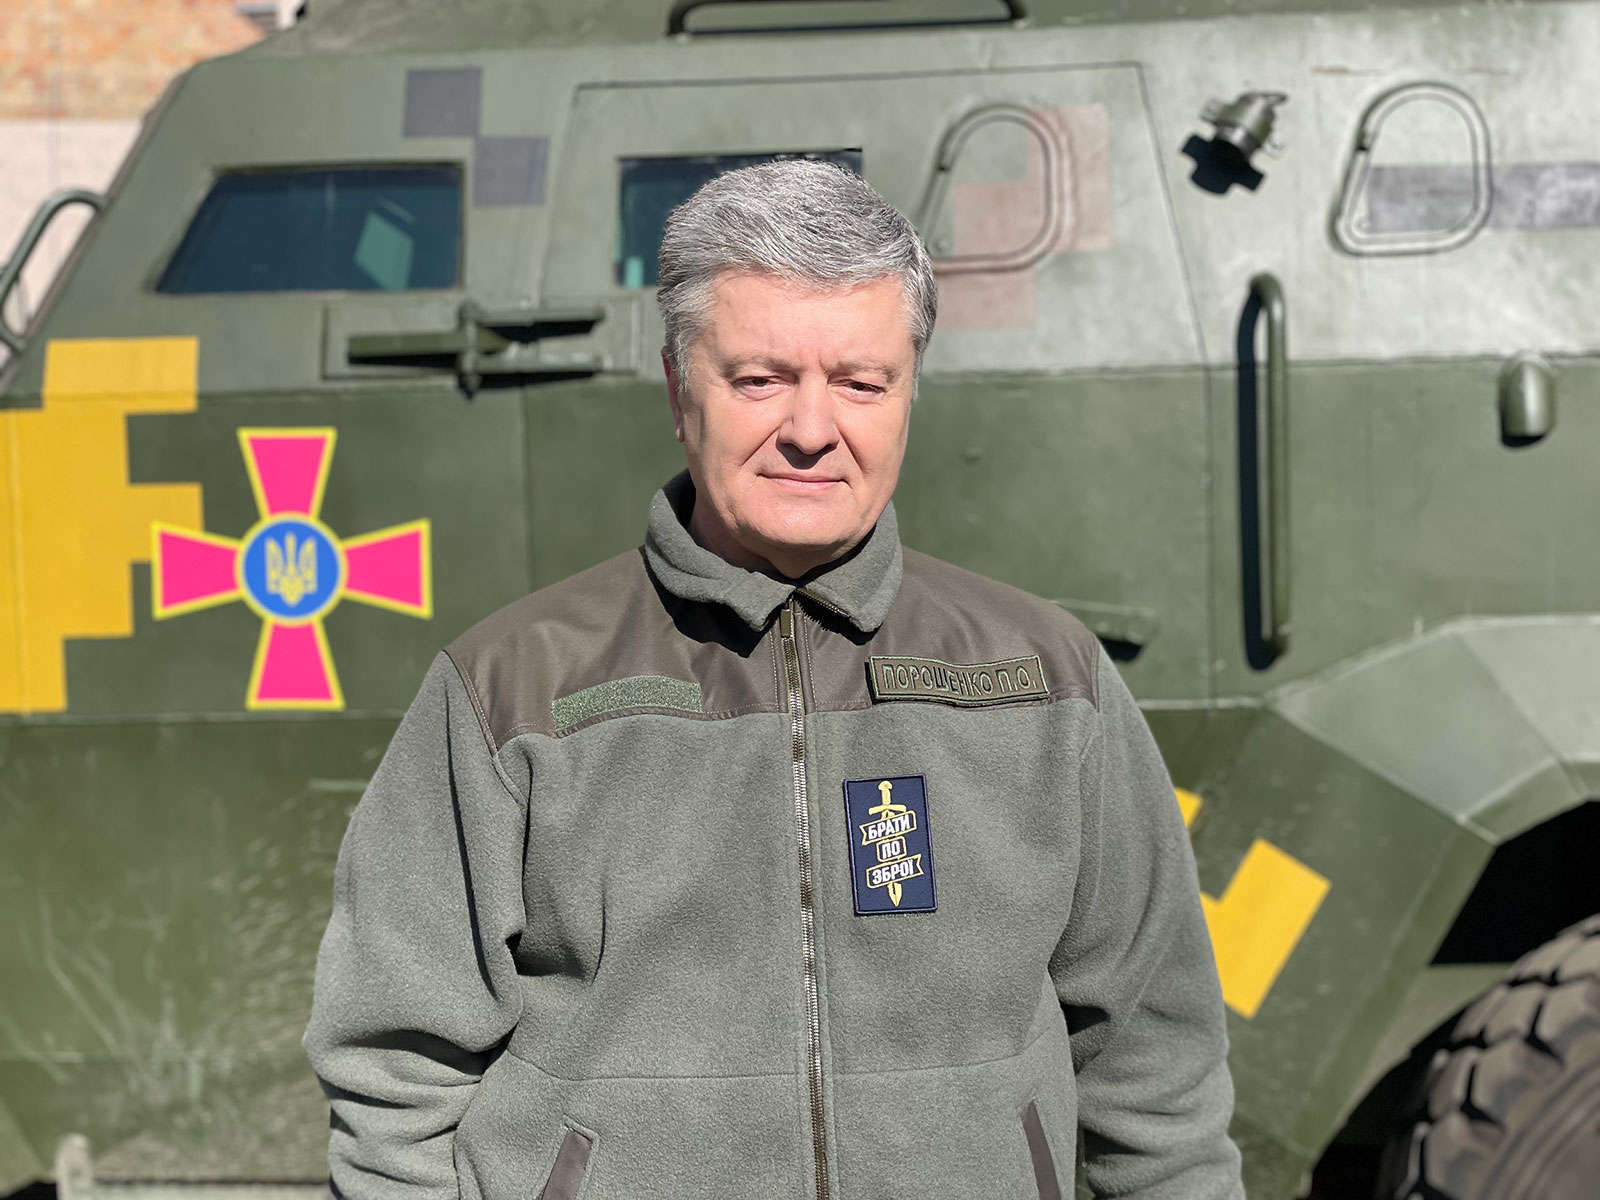 Petro Poroshenko, former President of Ukraine, is now a part of the Territorial Defense Forces.